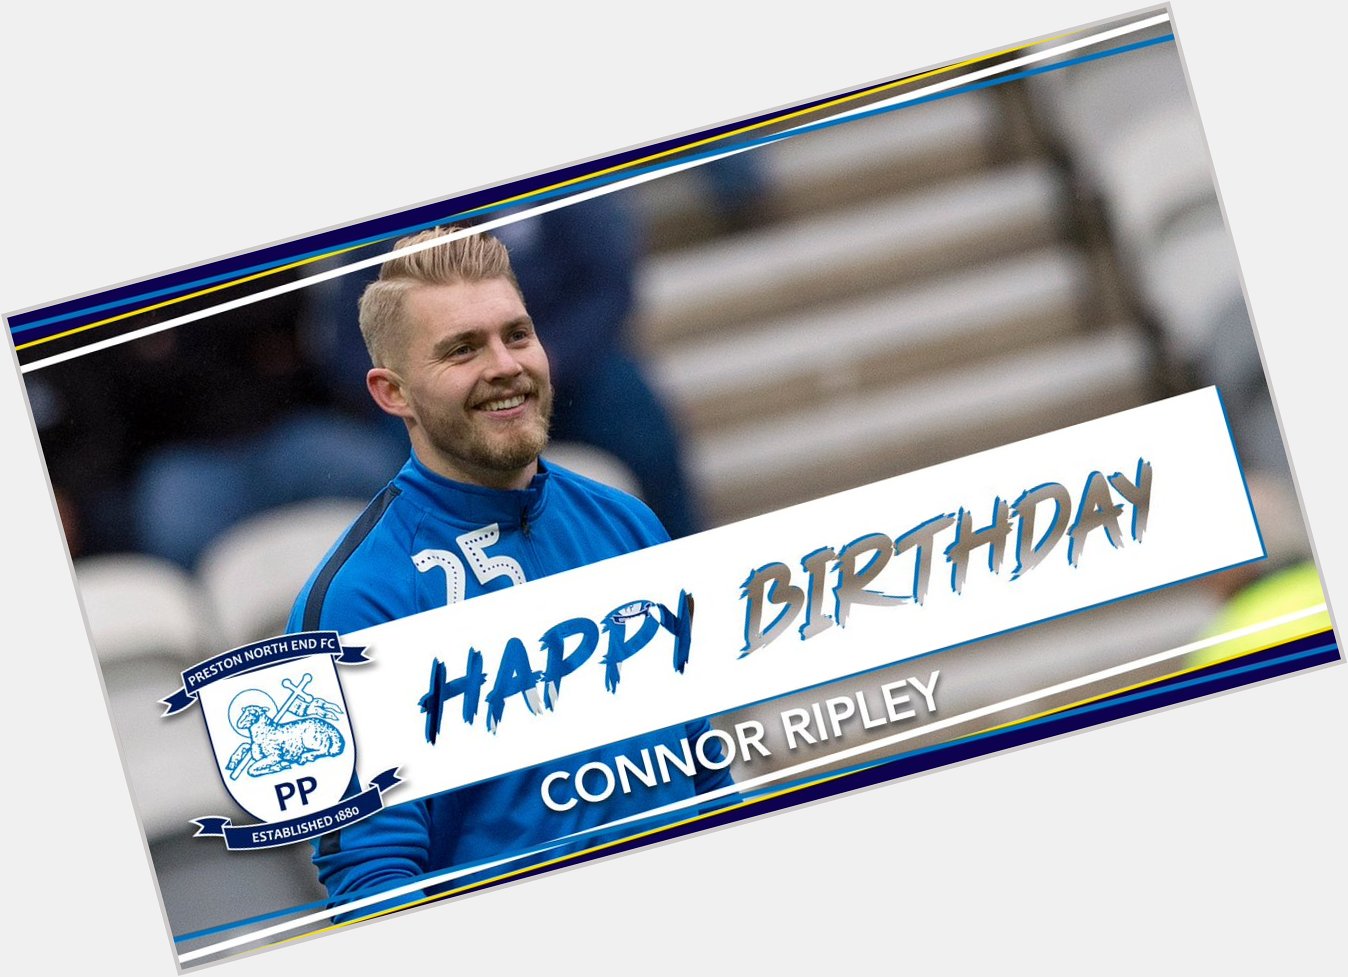  Happy birthday to Connor Ripley who turns 26 today! Wishing you a speedy recovery!  